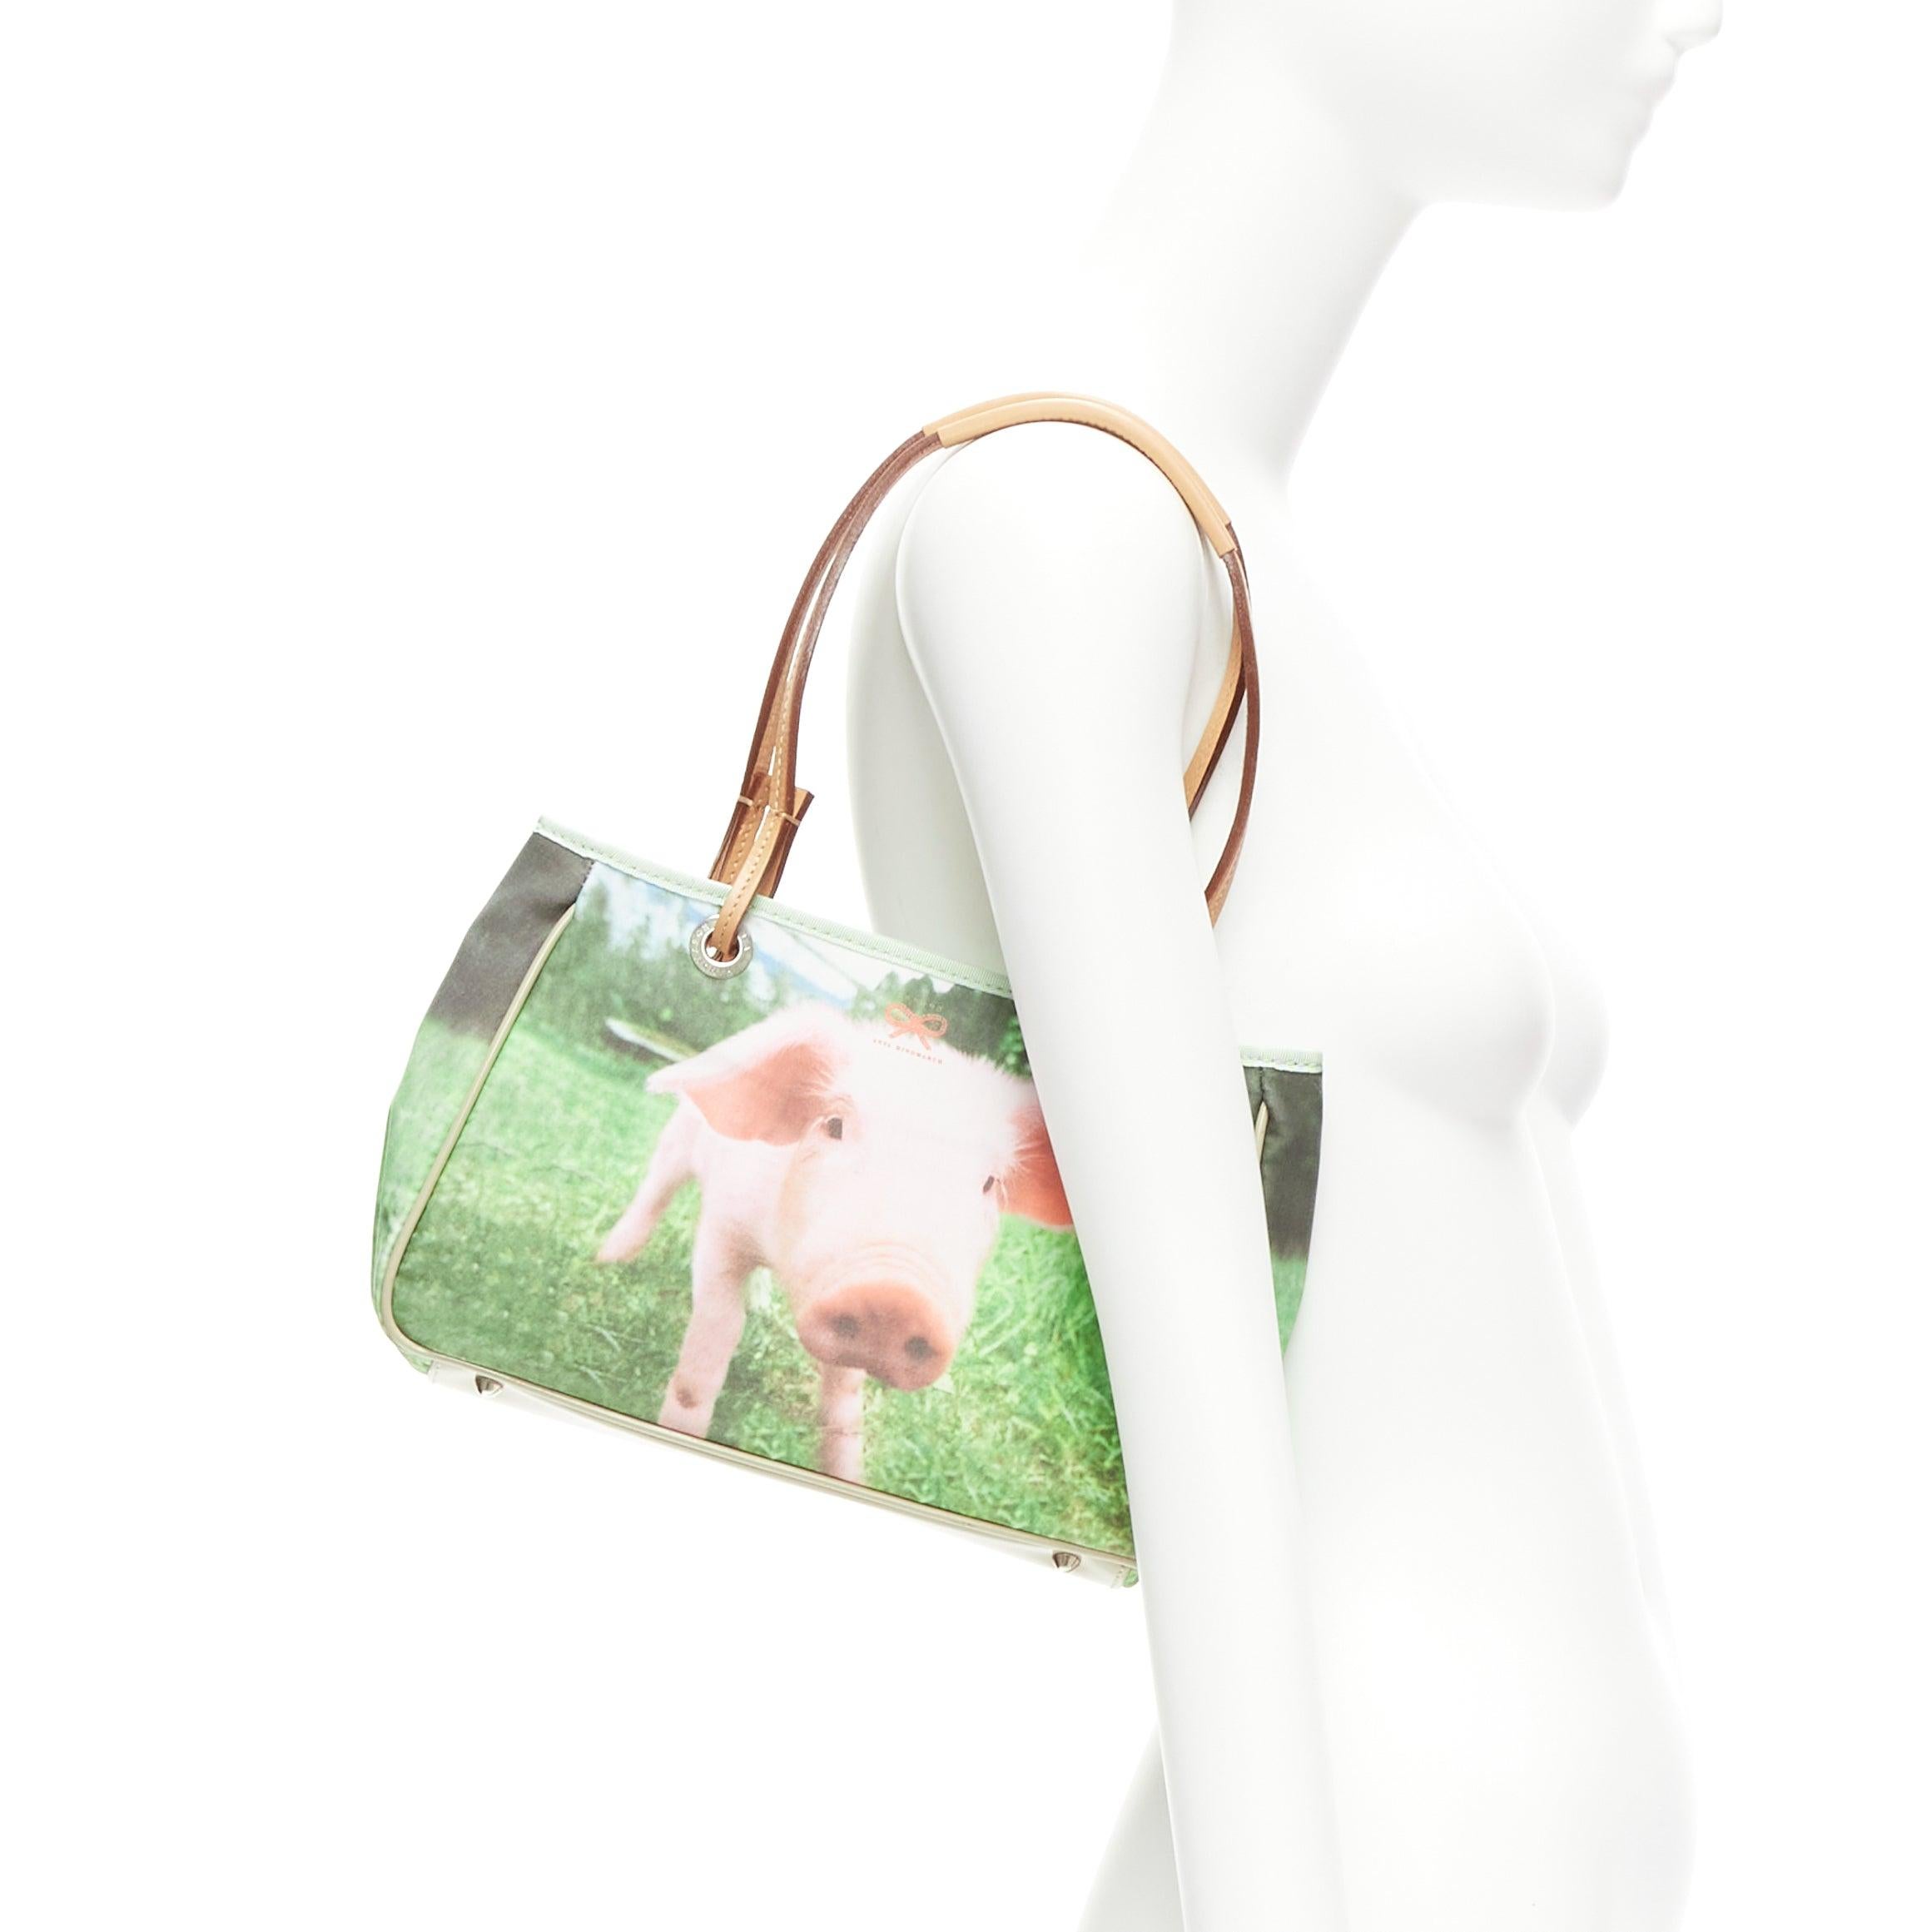 ANYA HINDMARCH green pink Piglet print leather handle small tote bag
Reference: ANWU/A01074
Brand: Anya Hindmarch
Material: Fabric, Leather
Color: Green, Brown
Pattern: Photographic Print
Closure: Snap Buttons
Lining: Beige Fabric
Made in: